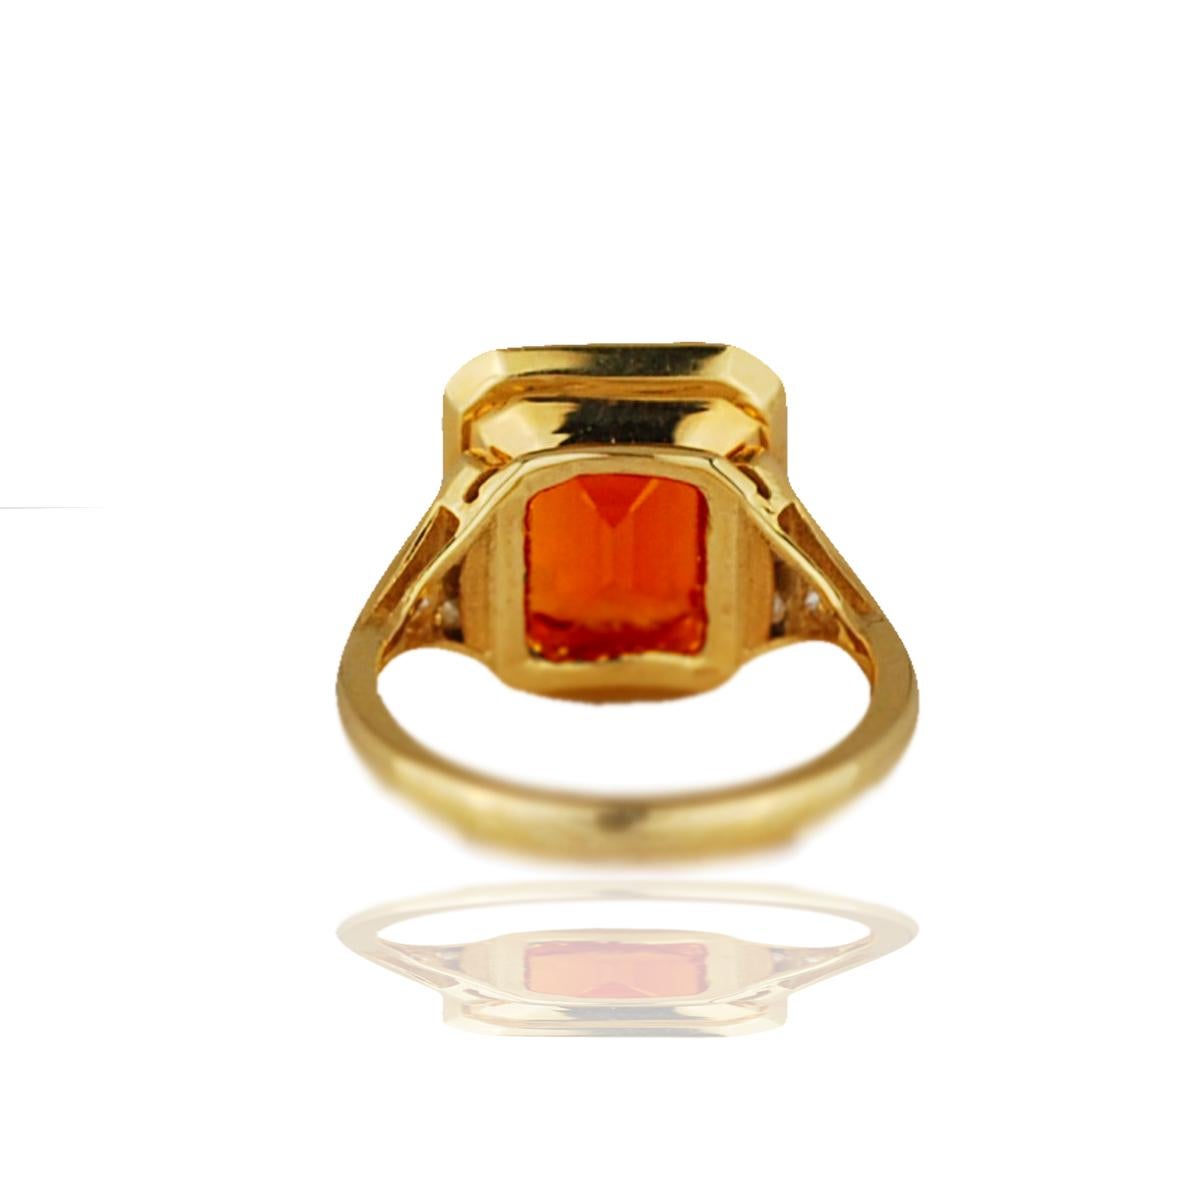 A stunning 4 carat emerald cut sits center in this orange sapphire (man-made) and diamond ring.  The center sapphire is a natural orange sapphire with a bright tangerine color.  The sapphire has a wonderful clarity and has great luster to the stone